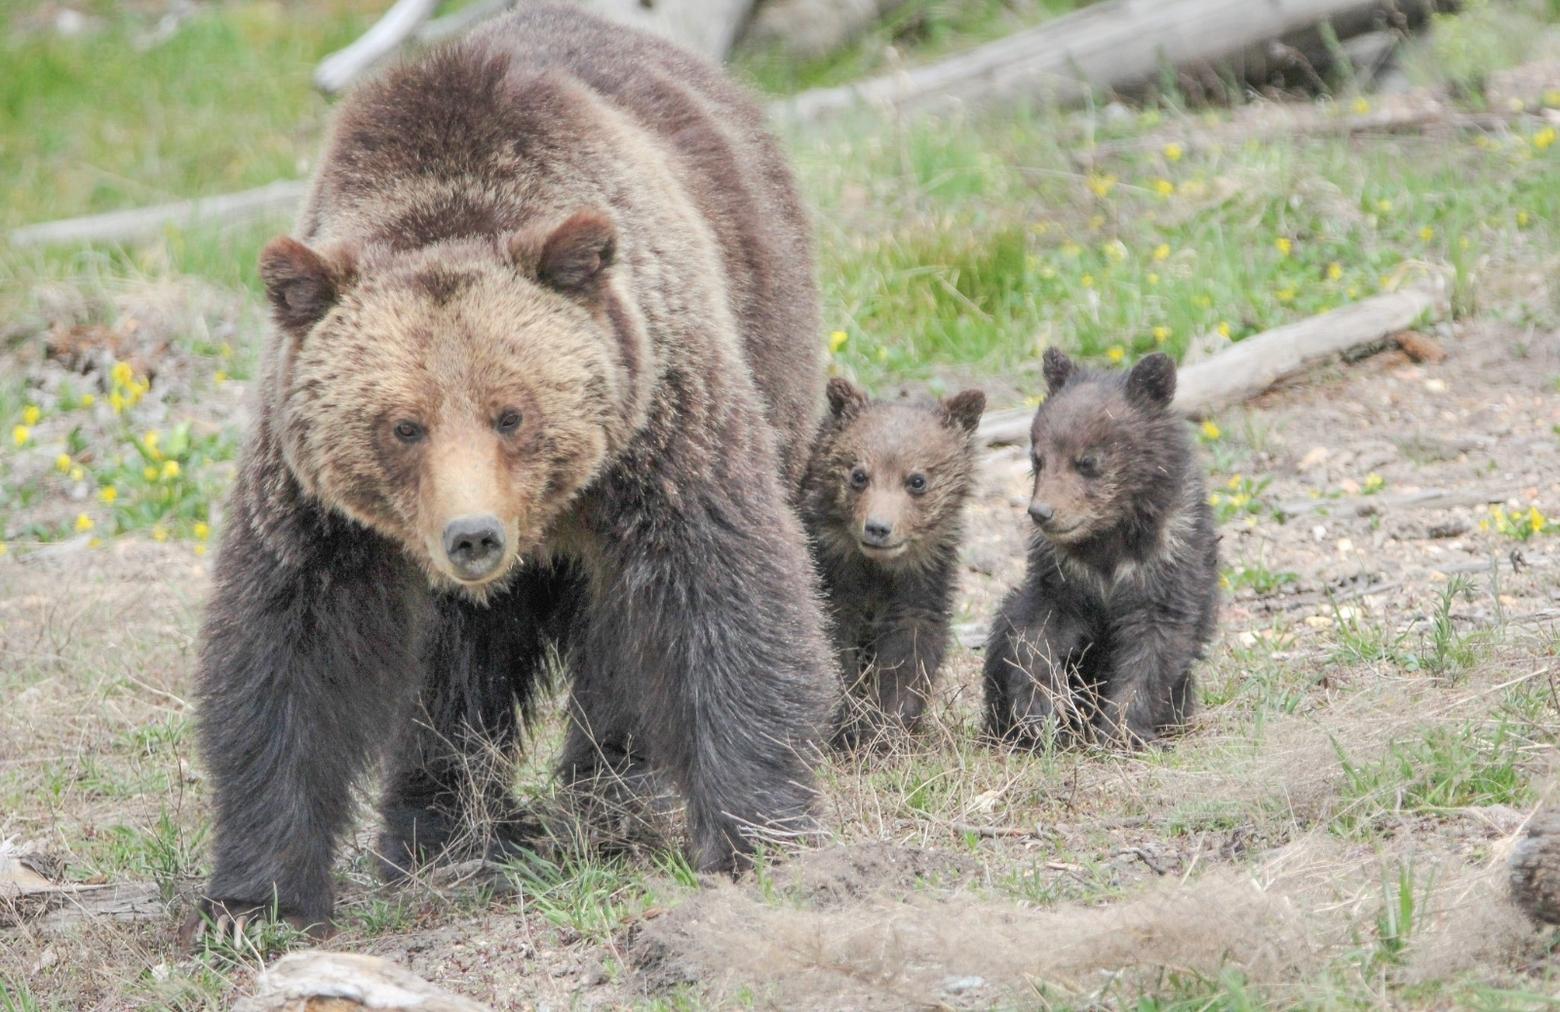 A mother grizzly and first-year cubs in Yellowstone, not unlike the adult bear killed in the Wind Rivers earlier in 2018 and her cubs orphaned and likely to die. Photo  courtesy NPS/Eric Johnston